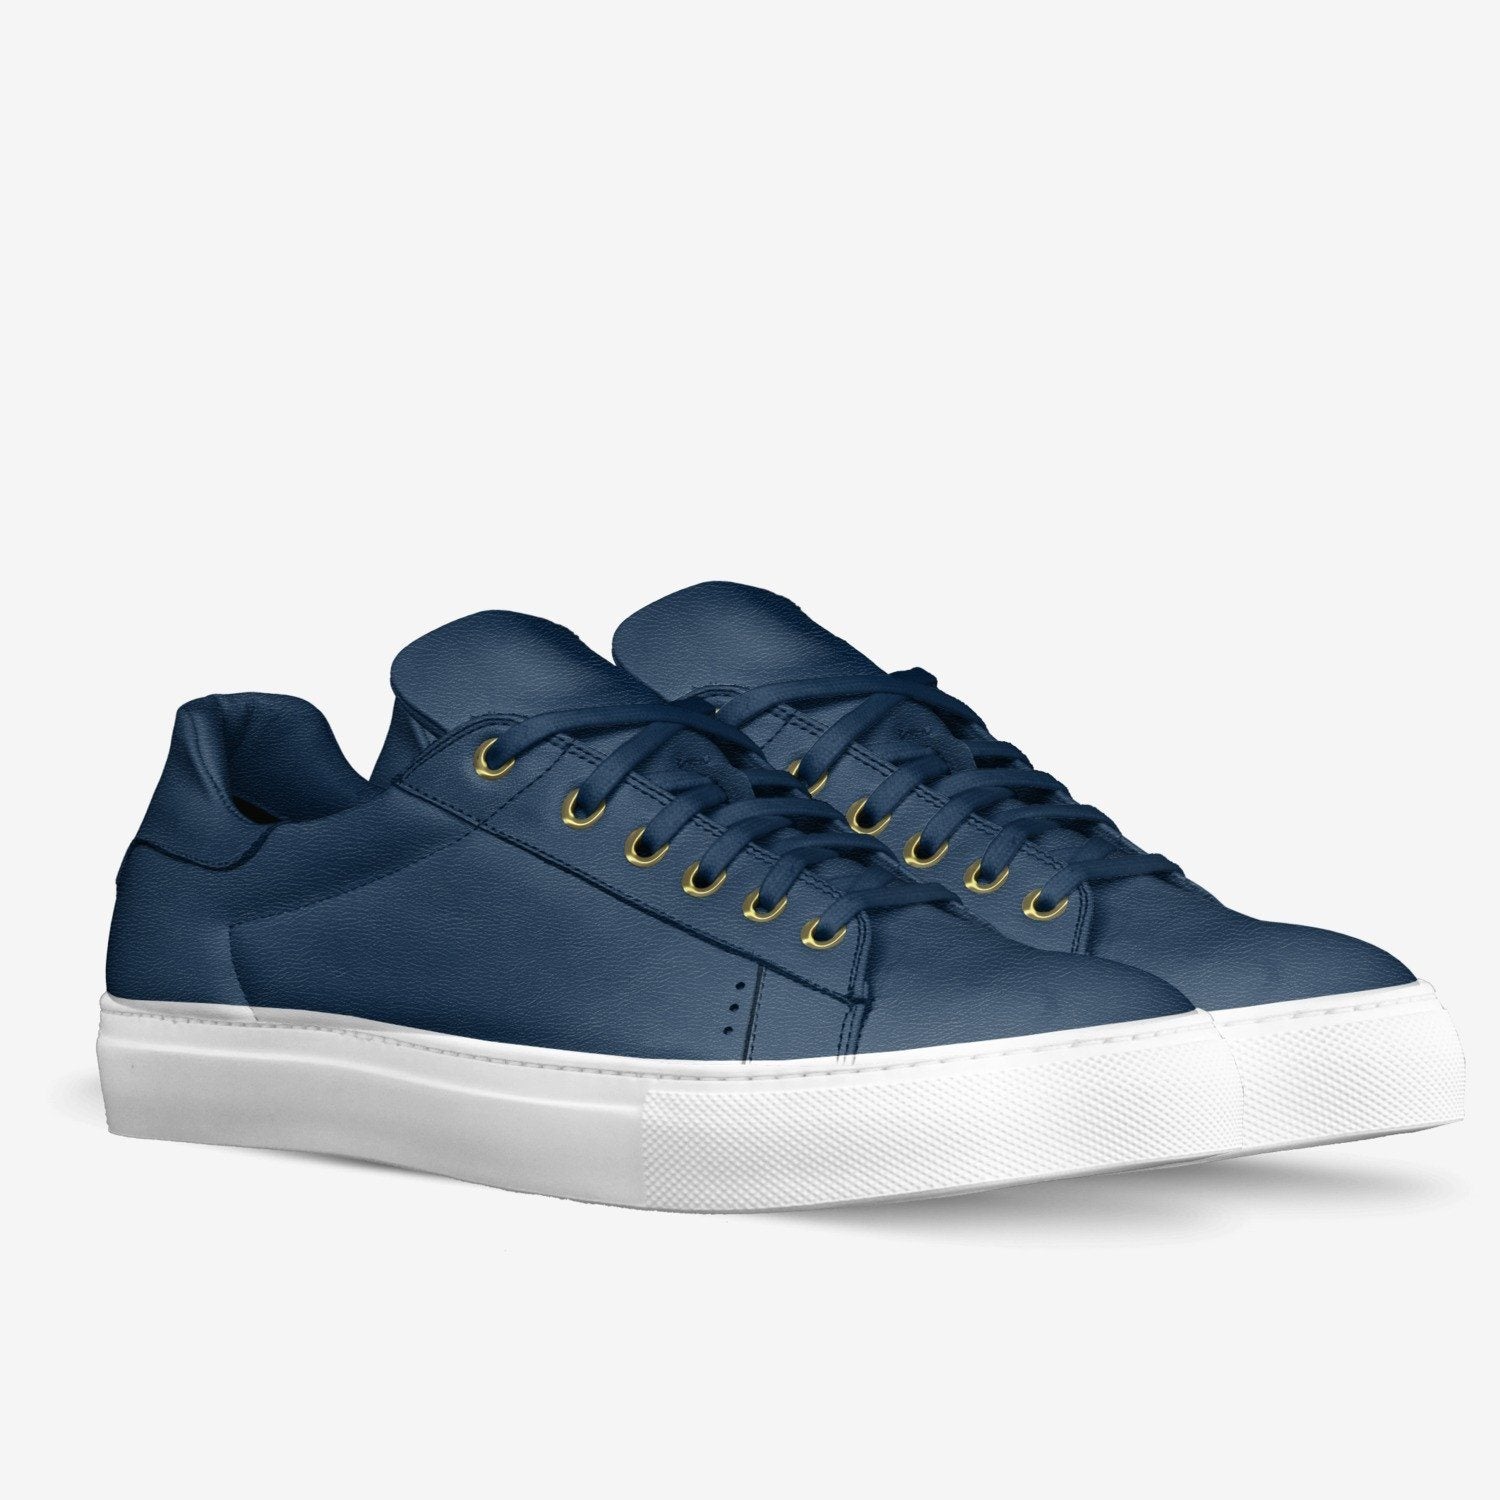 LORENZO LEATHER SNEAKERS IN MIDNIGHT BLUE | Poor Little Rich Boy Clothing